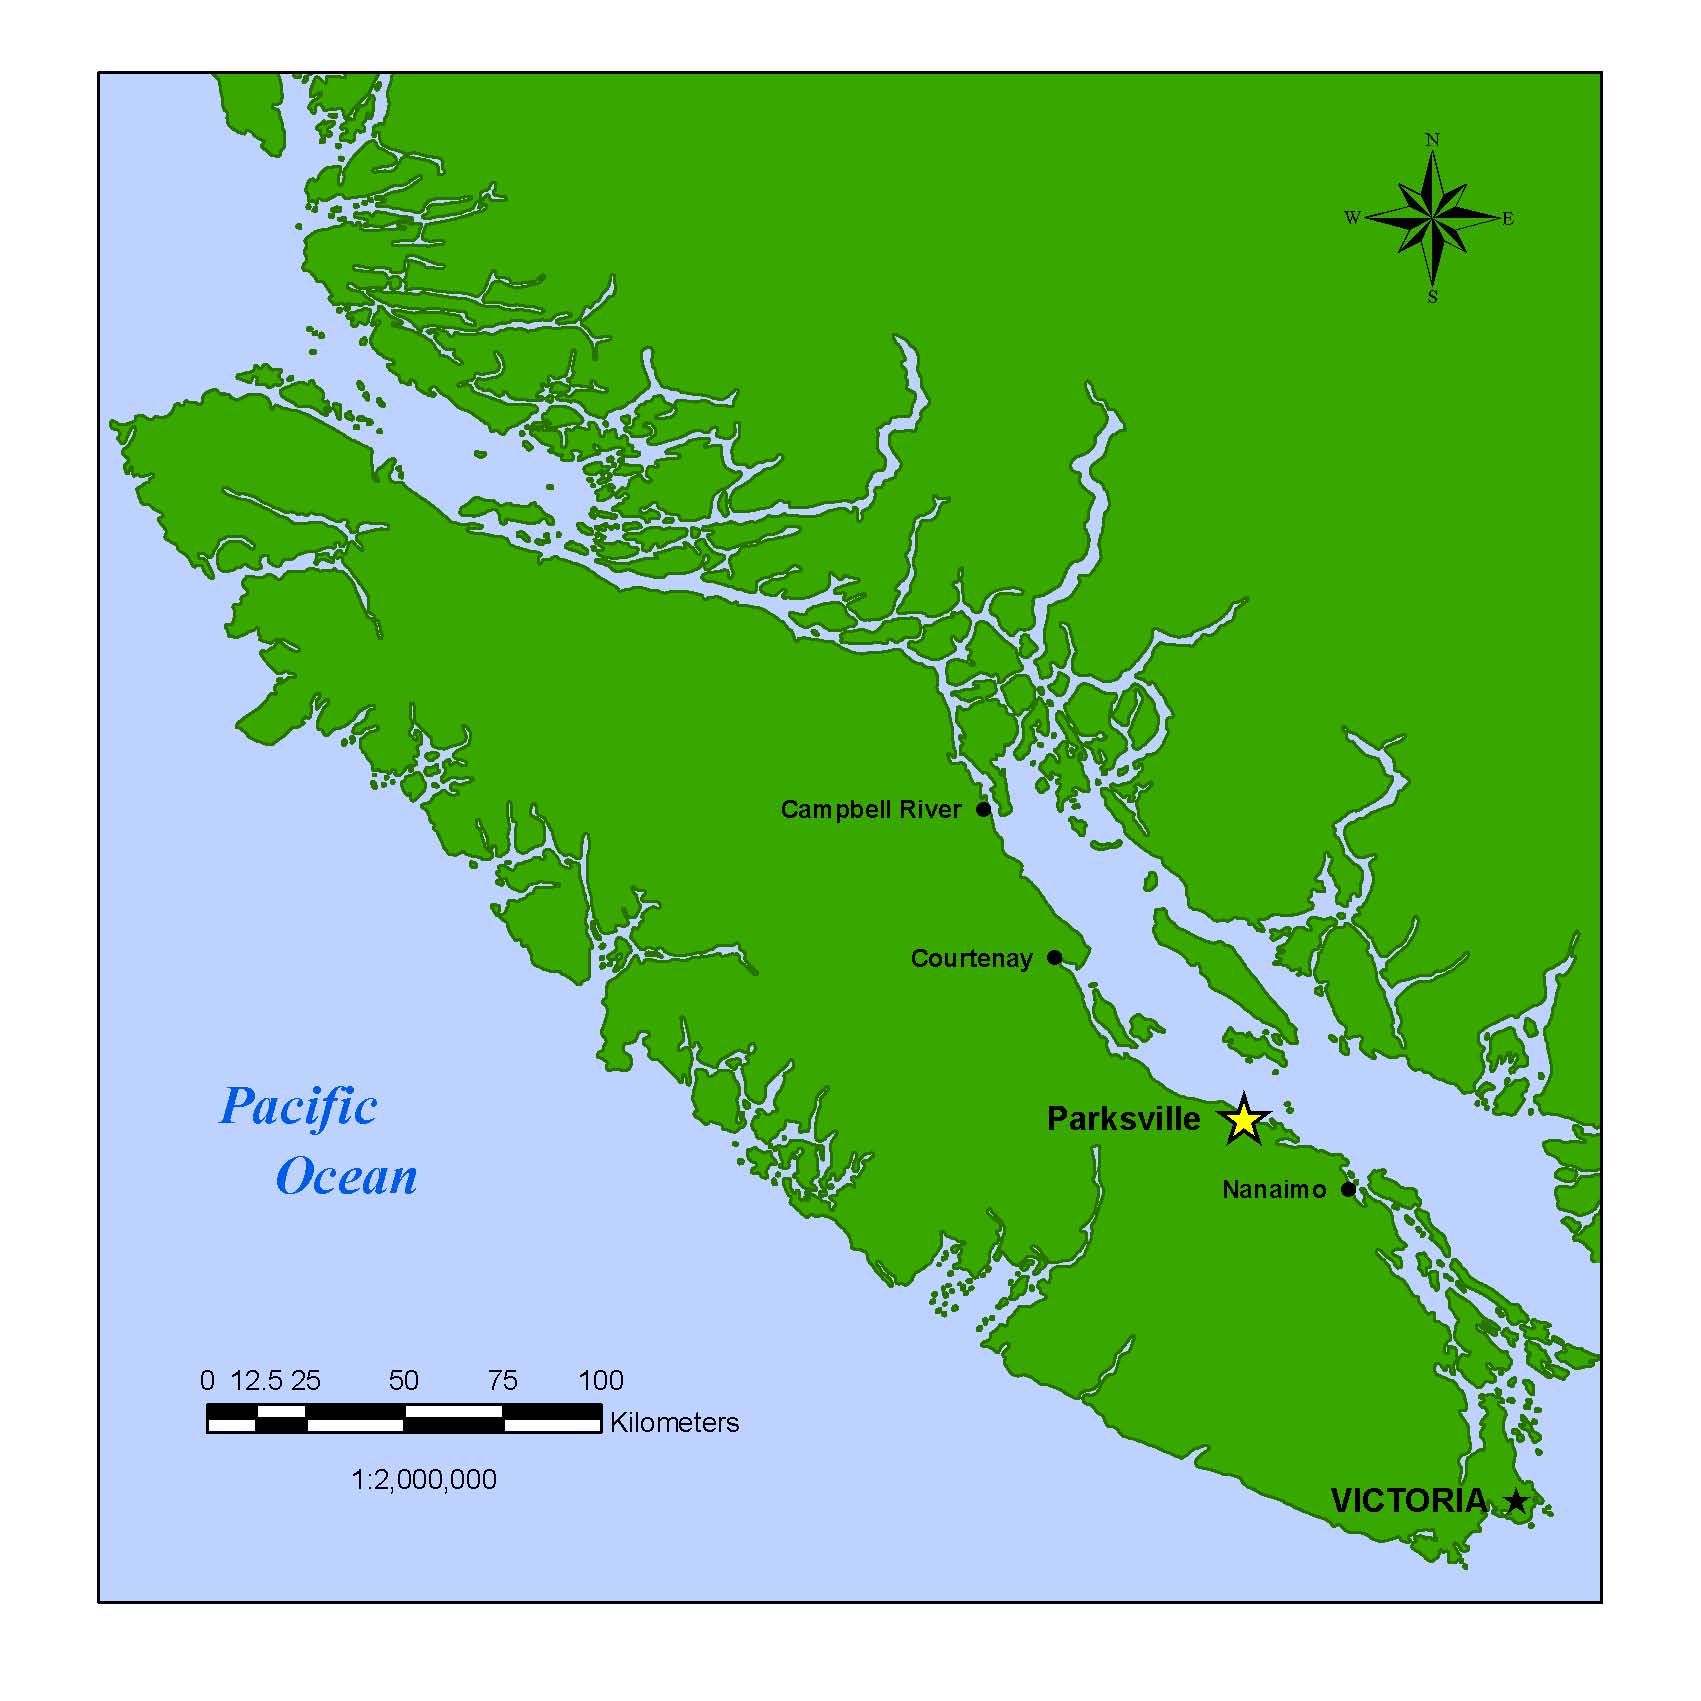 View Larger Map of Vancouver Island